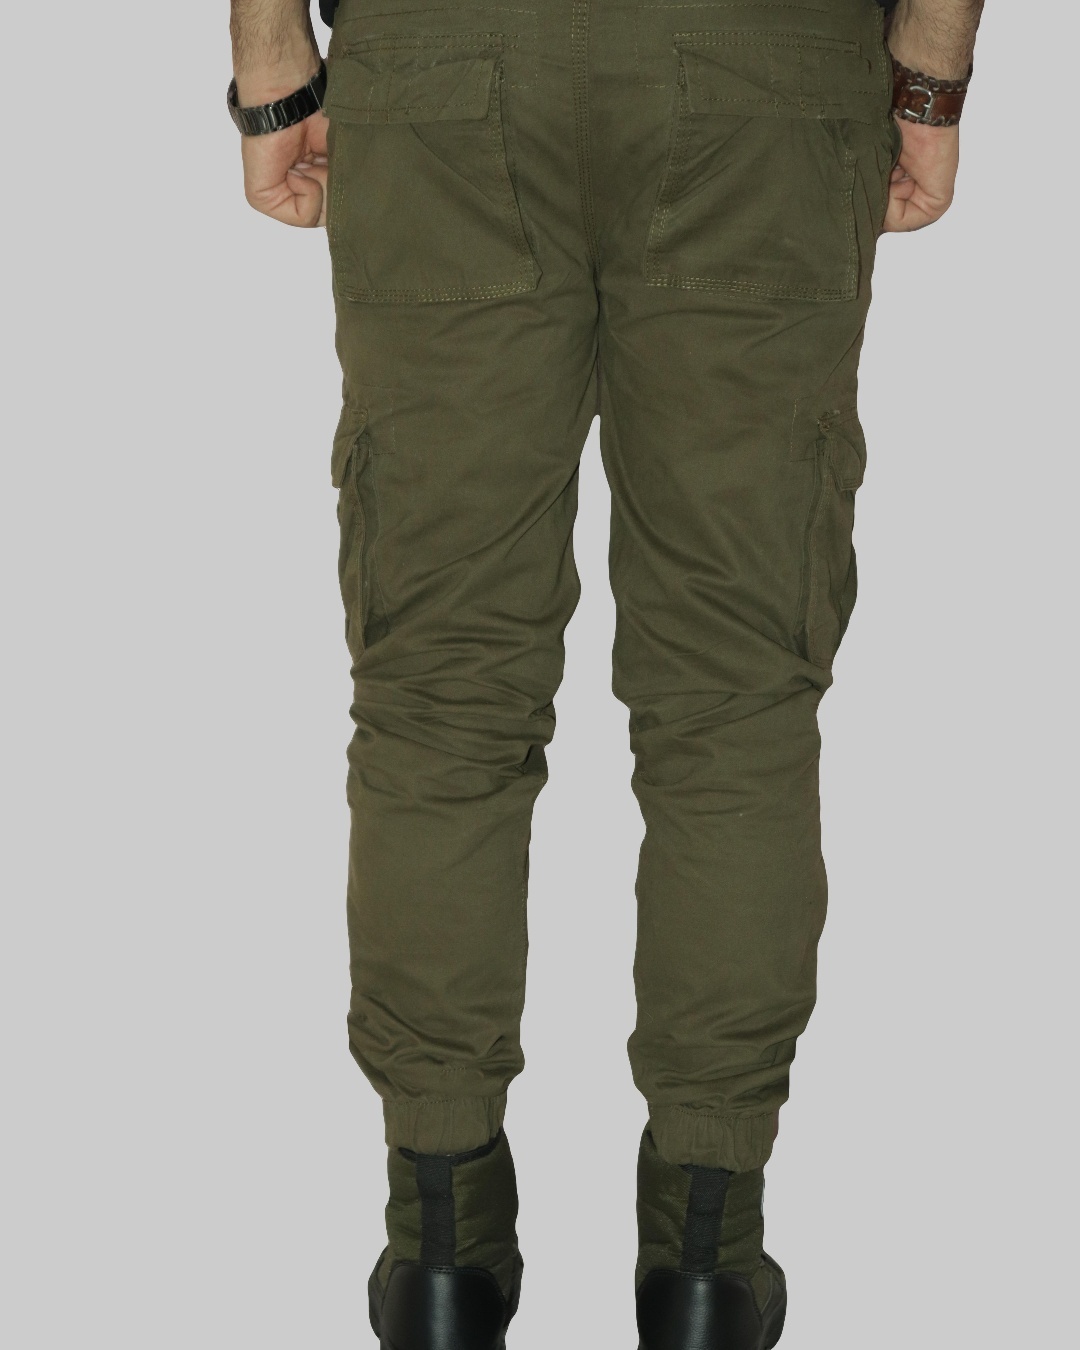 Buy Dafensi Military Cotton Cargo Pants for Women Outdoor Casual Work Pants  Combat Pants with 8 Pockets Armygreen30 at Amazonin